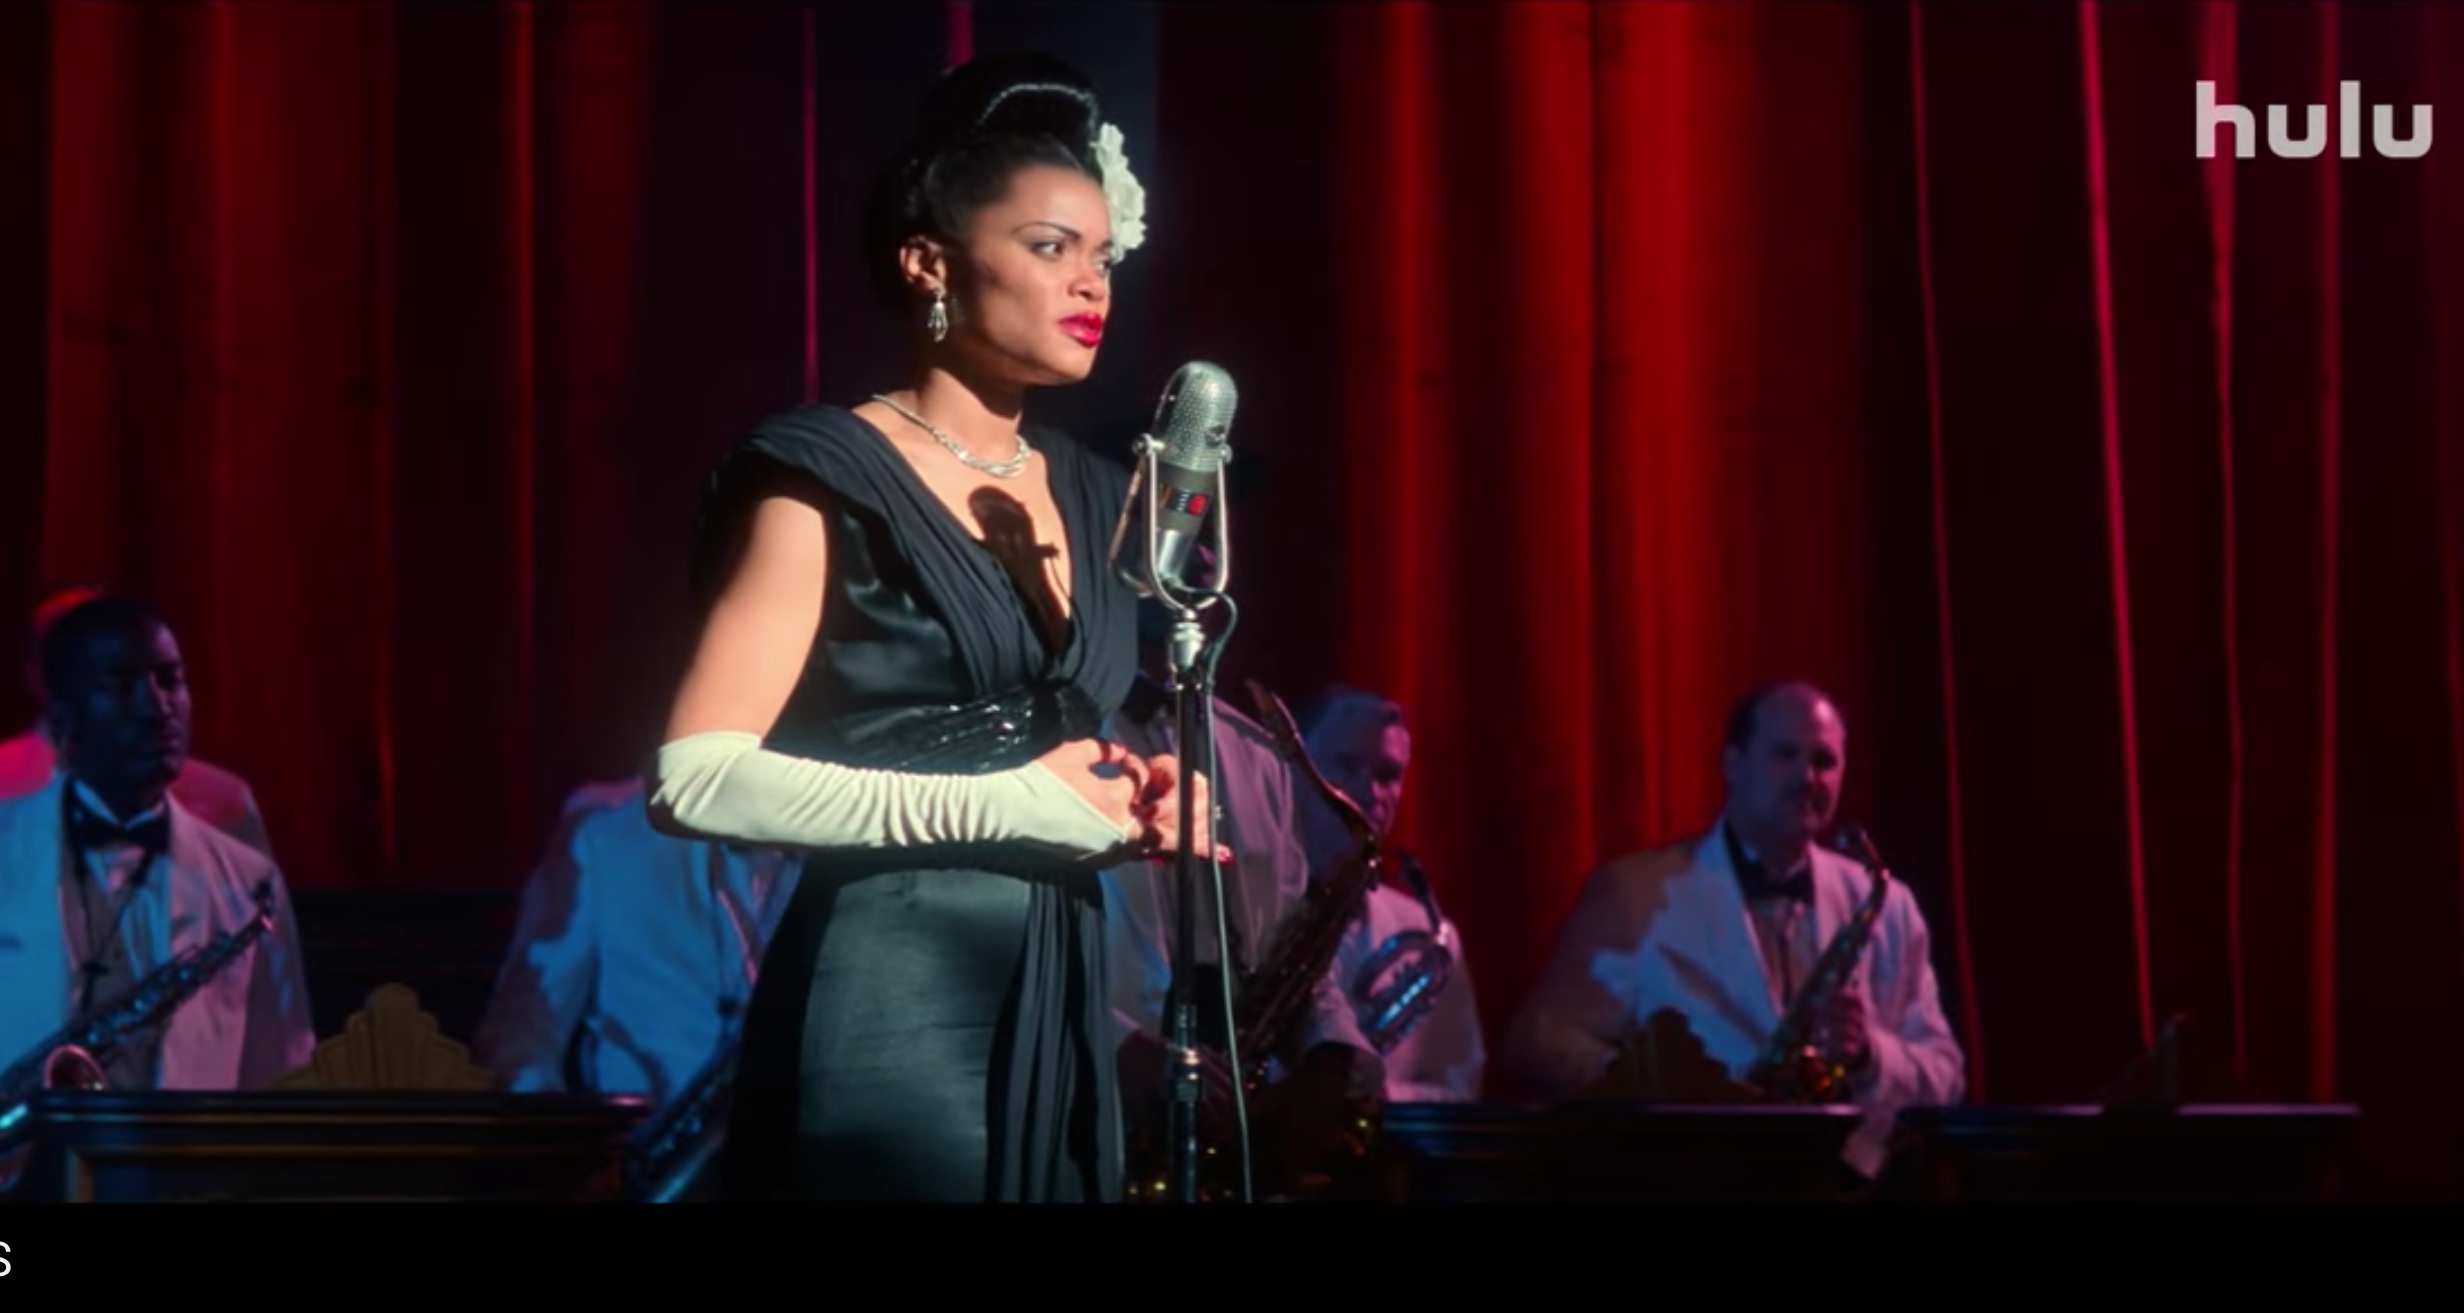 billie holiday, lee daniels, andra day, trailer, united states vs. billie holiday